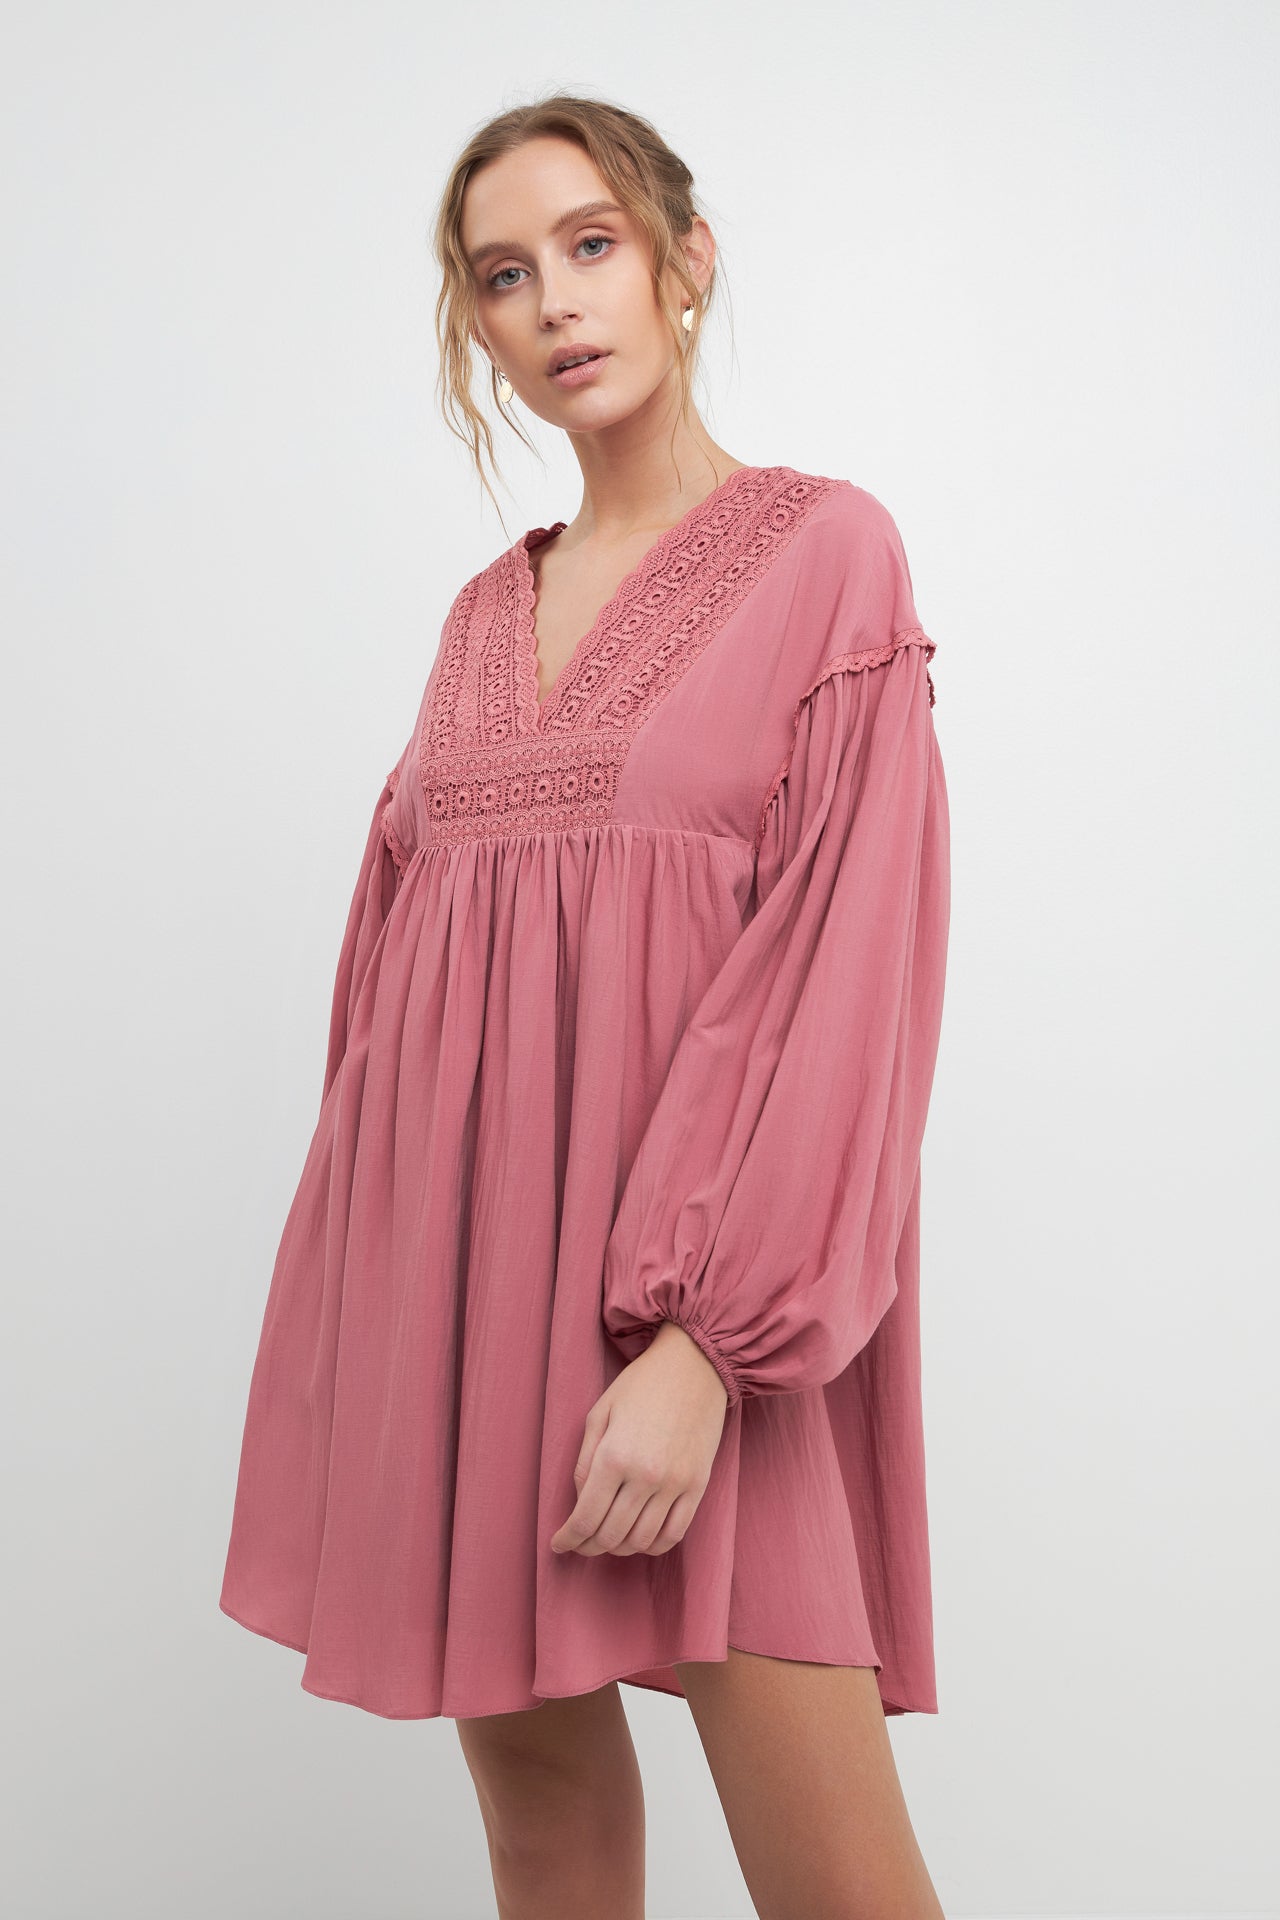 FREE THE ROSES - Laced Blouson Sleeve Shift Dress - DRESSES available at Objectrare